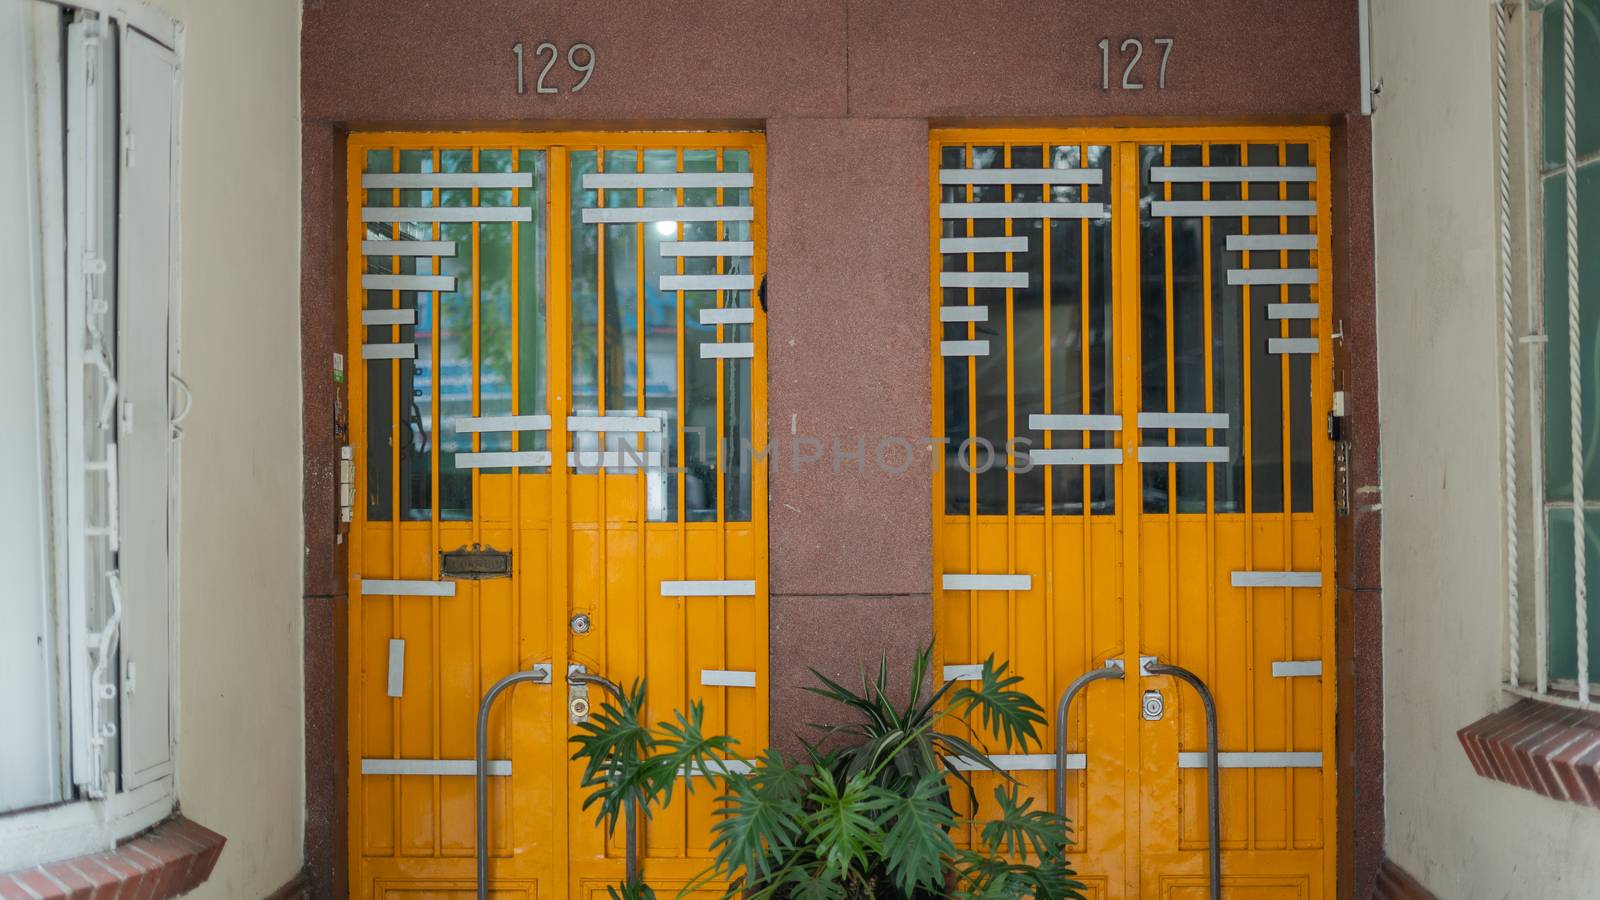 Picture of two orange doors from an apartment building with the numbers 129 and 127 over them